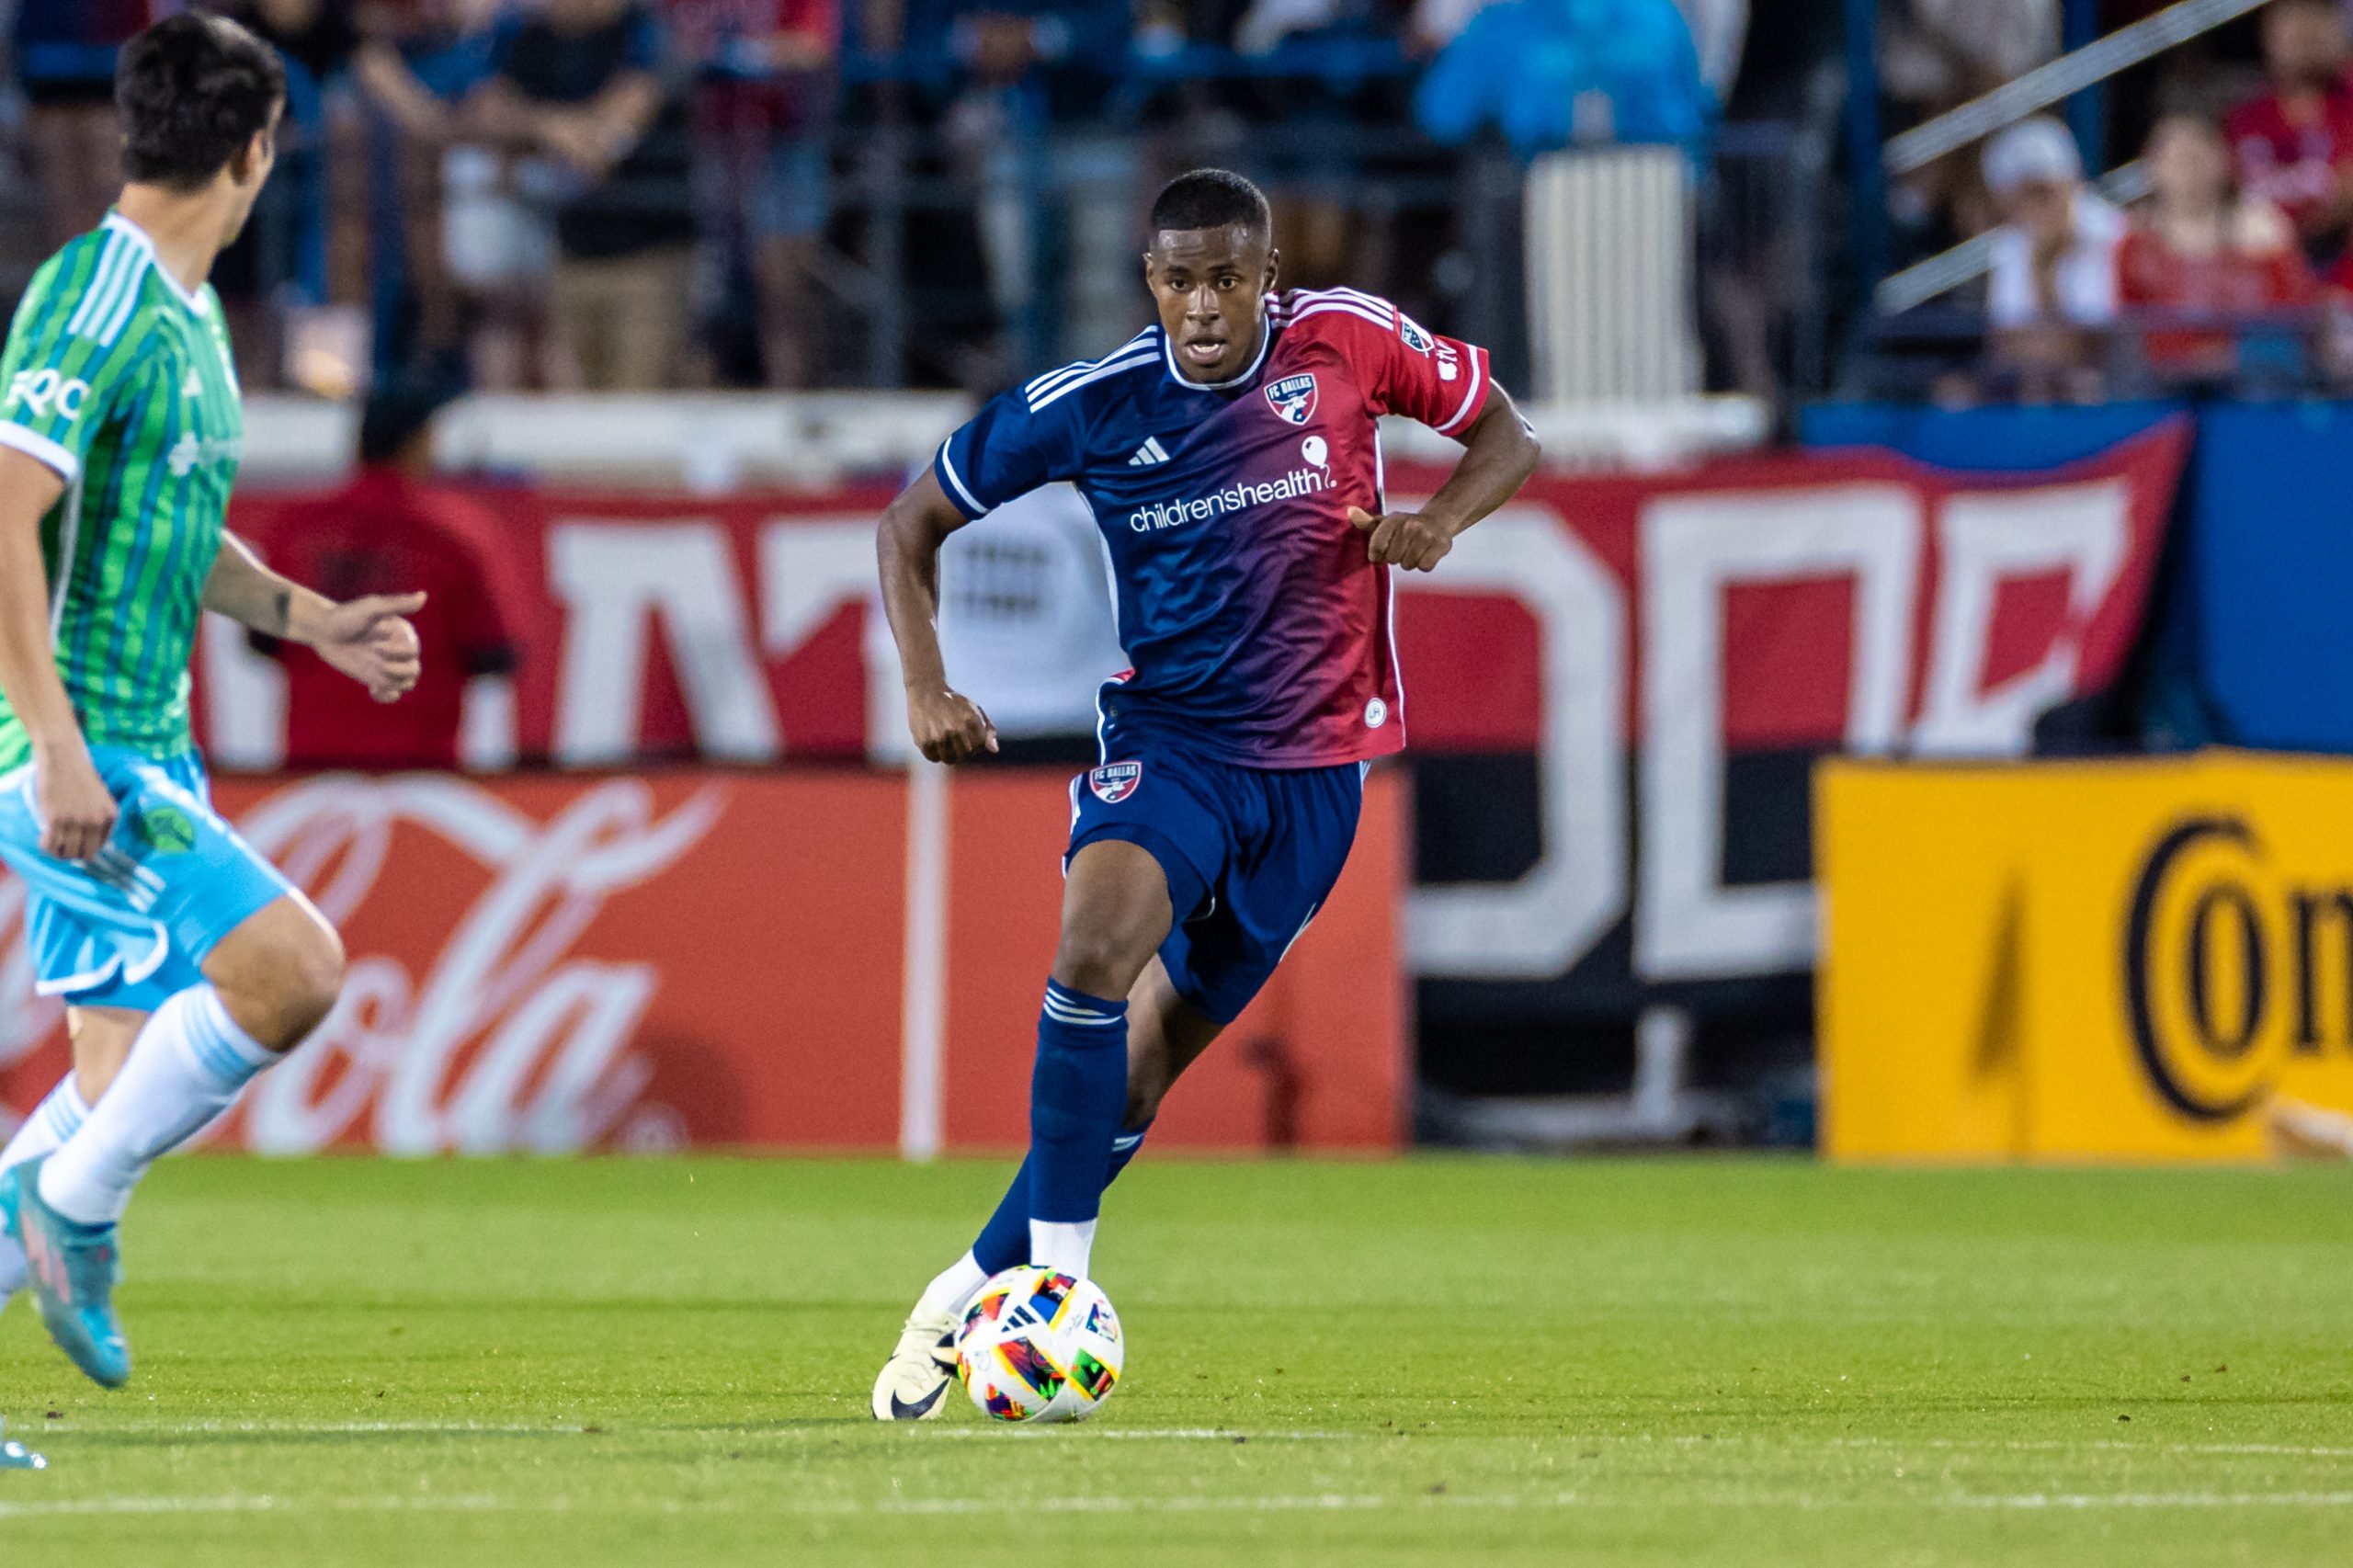 FRISCO, TX - APRIL 13: Patrickson Delgado cuts through midfield during the MLS soccer game between FC Dallas and Seattle Sounders FC on April 13, 2024 at Toyota Stadium in Frisco, TX. (Photo by Matthew Visinsky/Icon Sportswire)